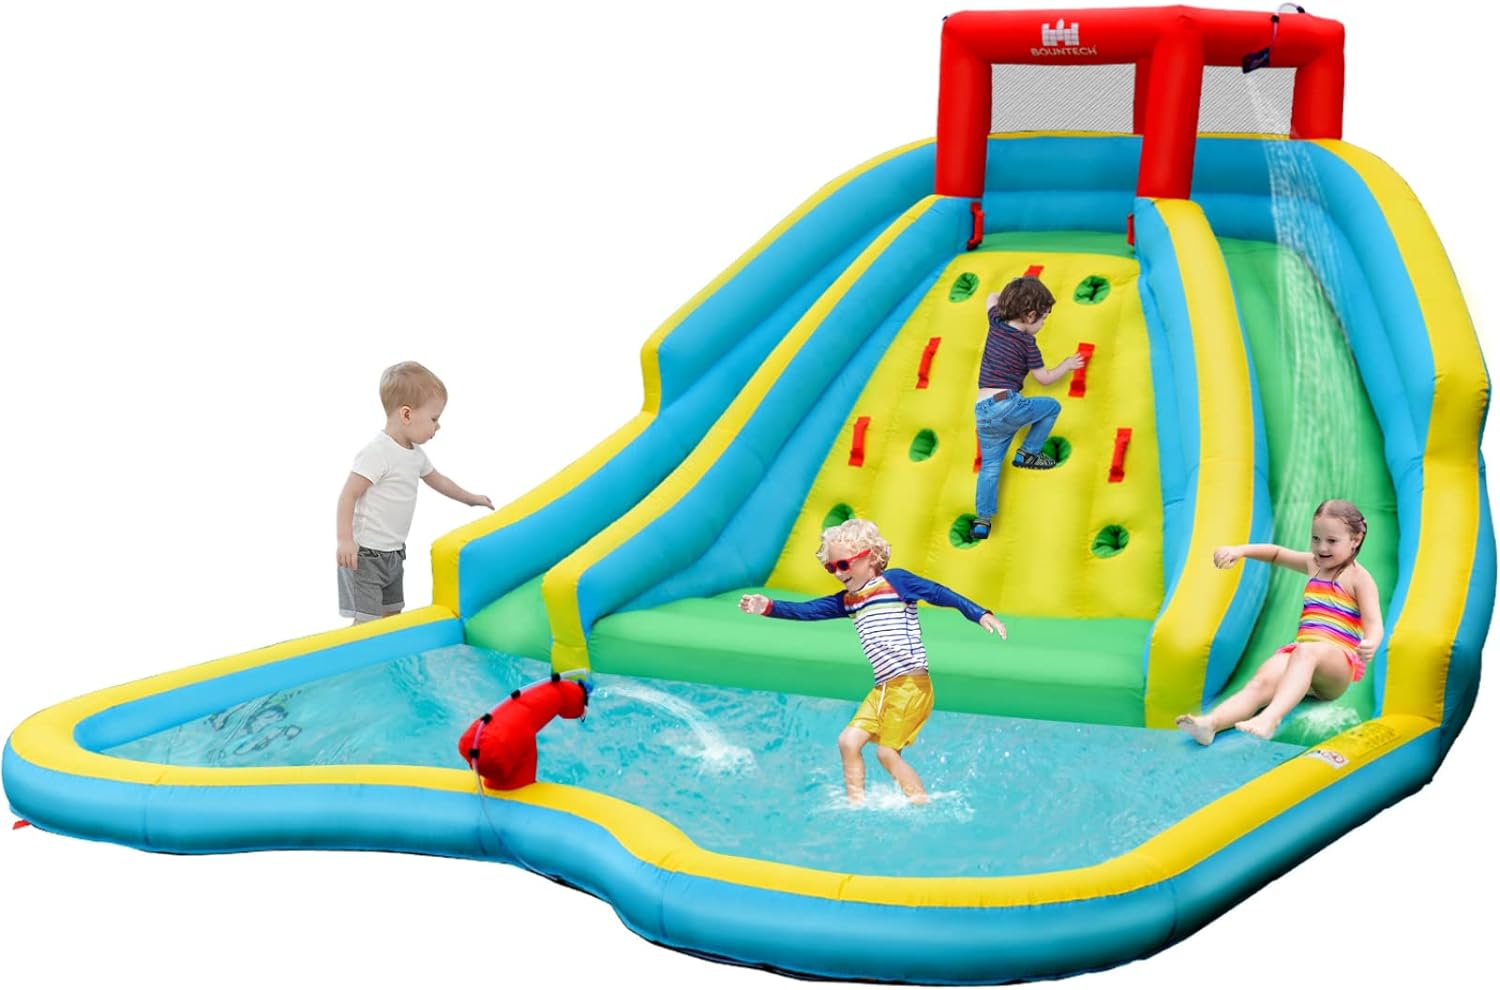 BOUNTECH Inflatable Water Slide, Mega Waterslide Park for Kids Backyard Outdoor Fun with Double Long Slides, Climbing Wall, Blow up Water Slides Inflatables for Kids and Adults Birthday Party Gifts